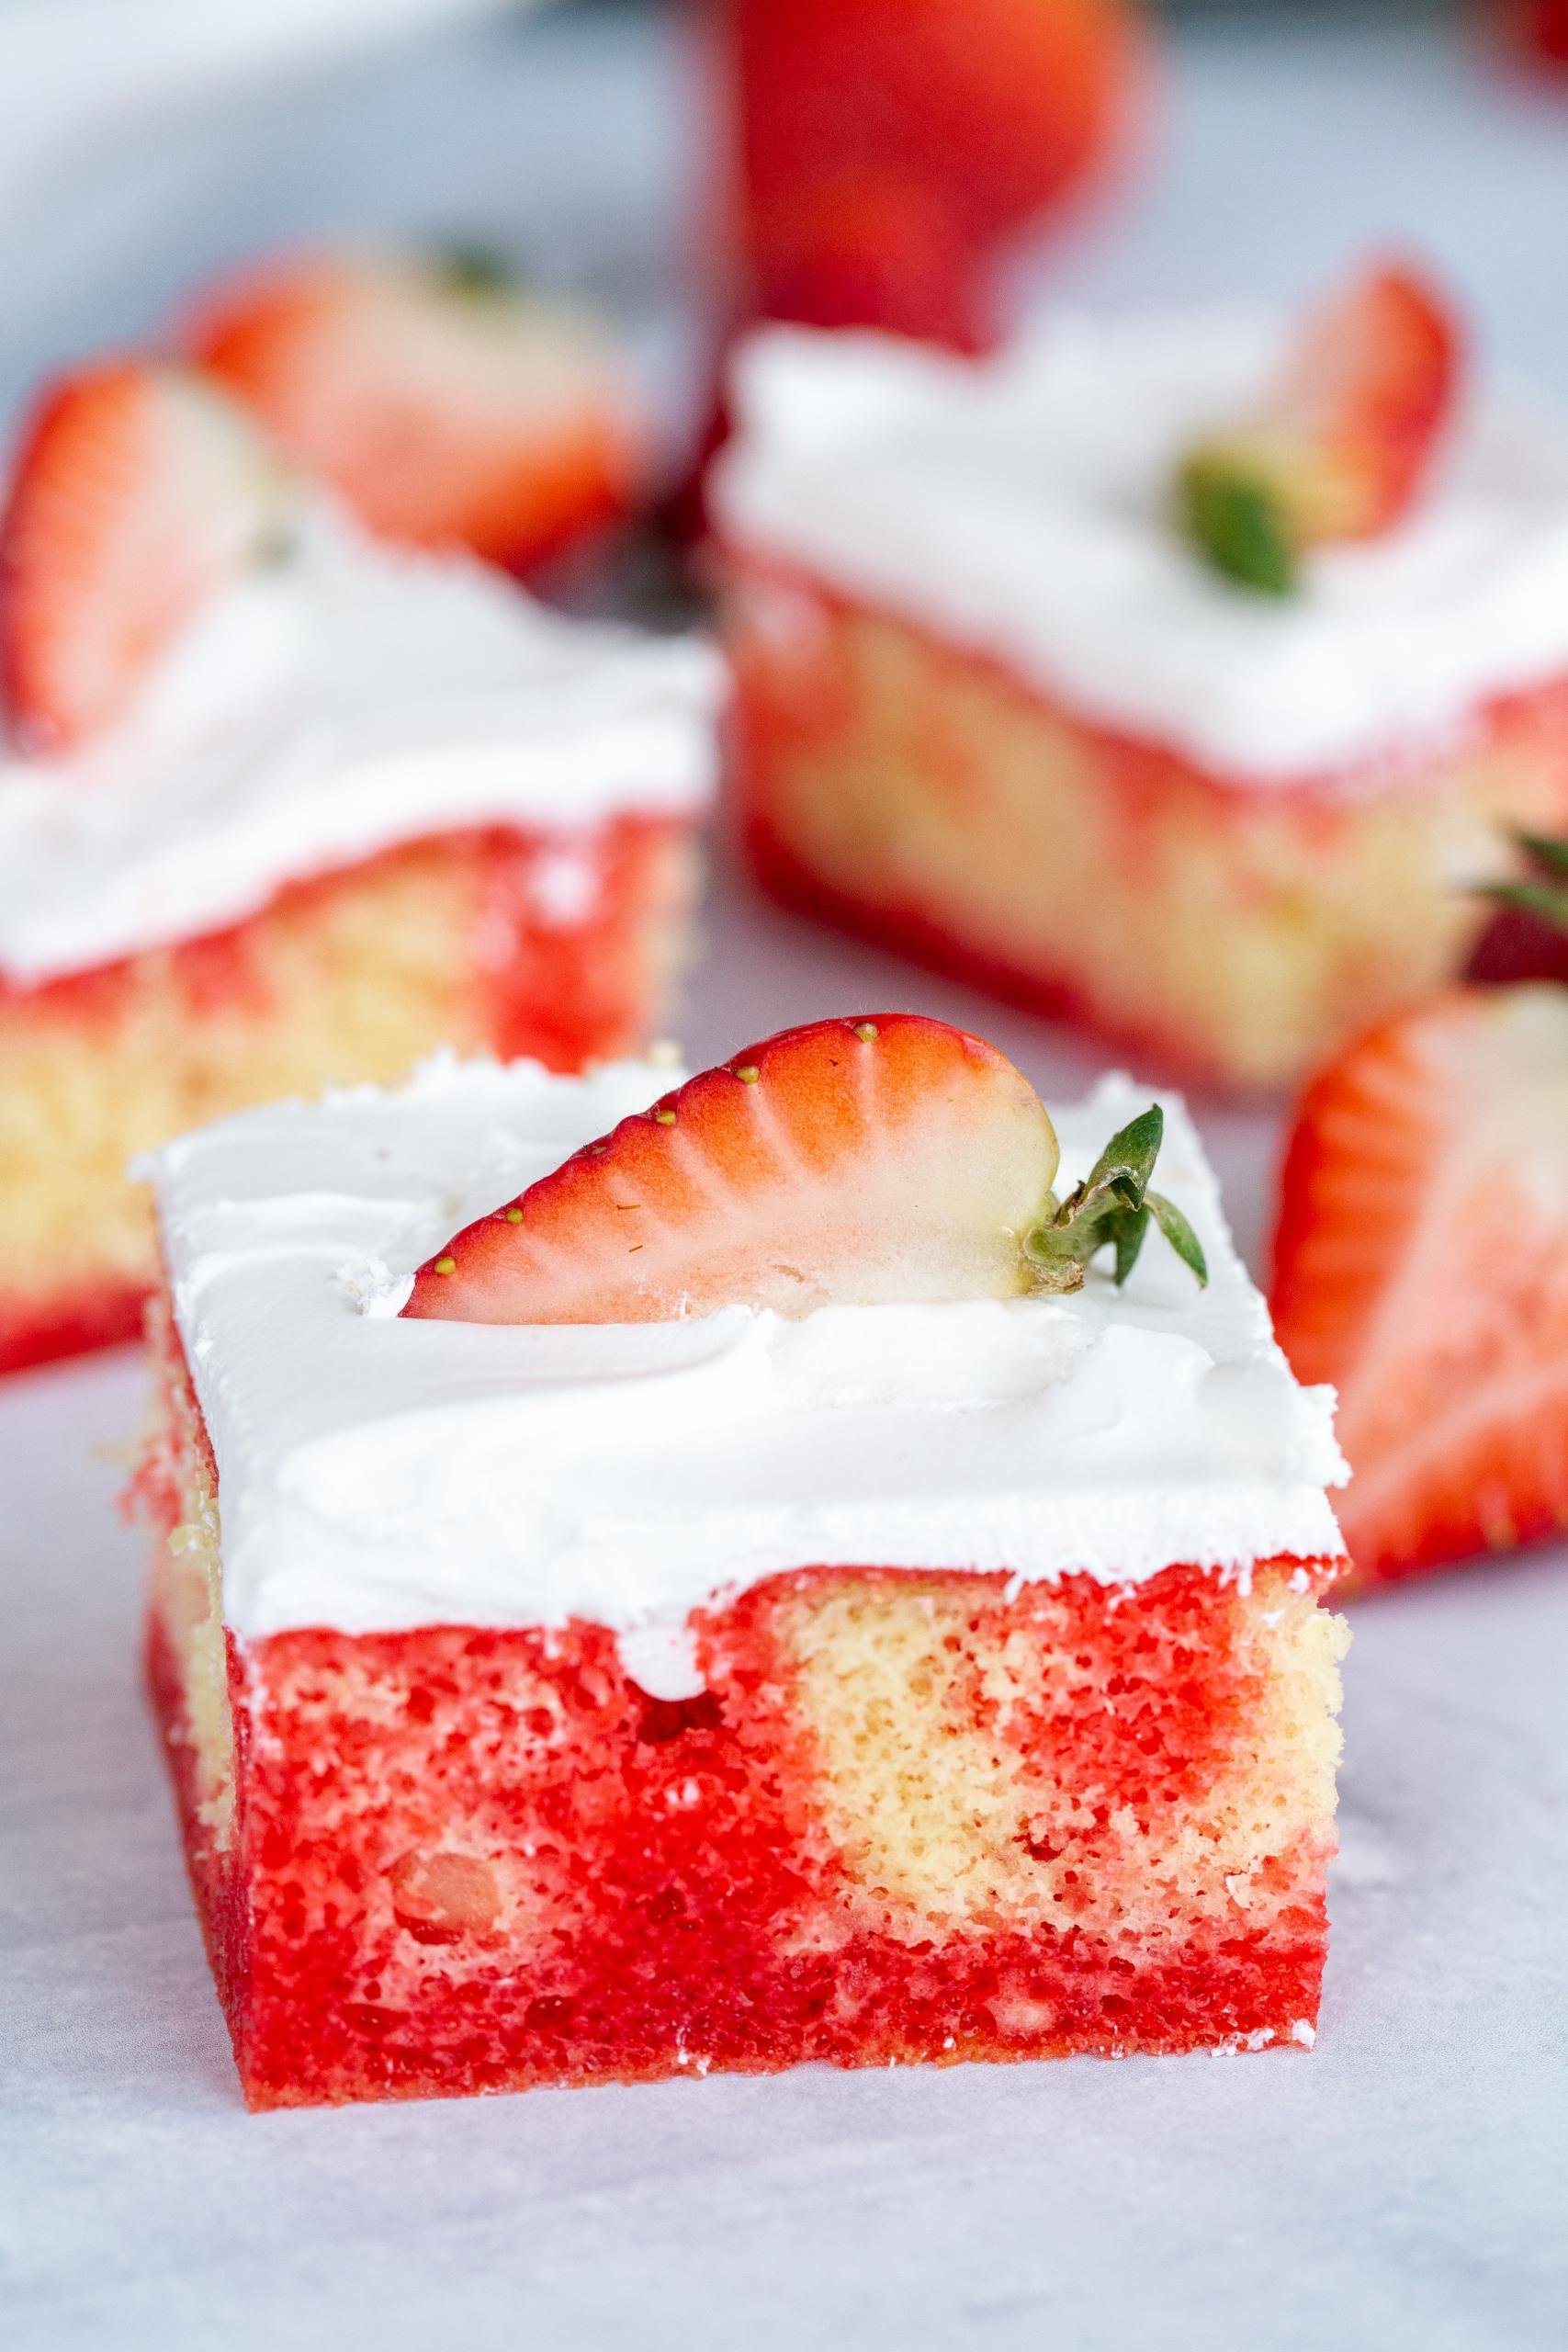 Discover more than 65 strawberry poke cake - in.daotaonec